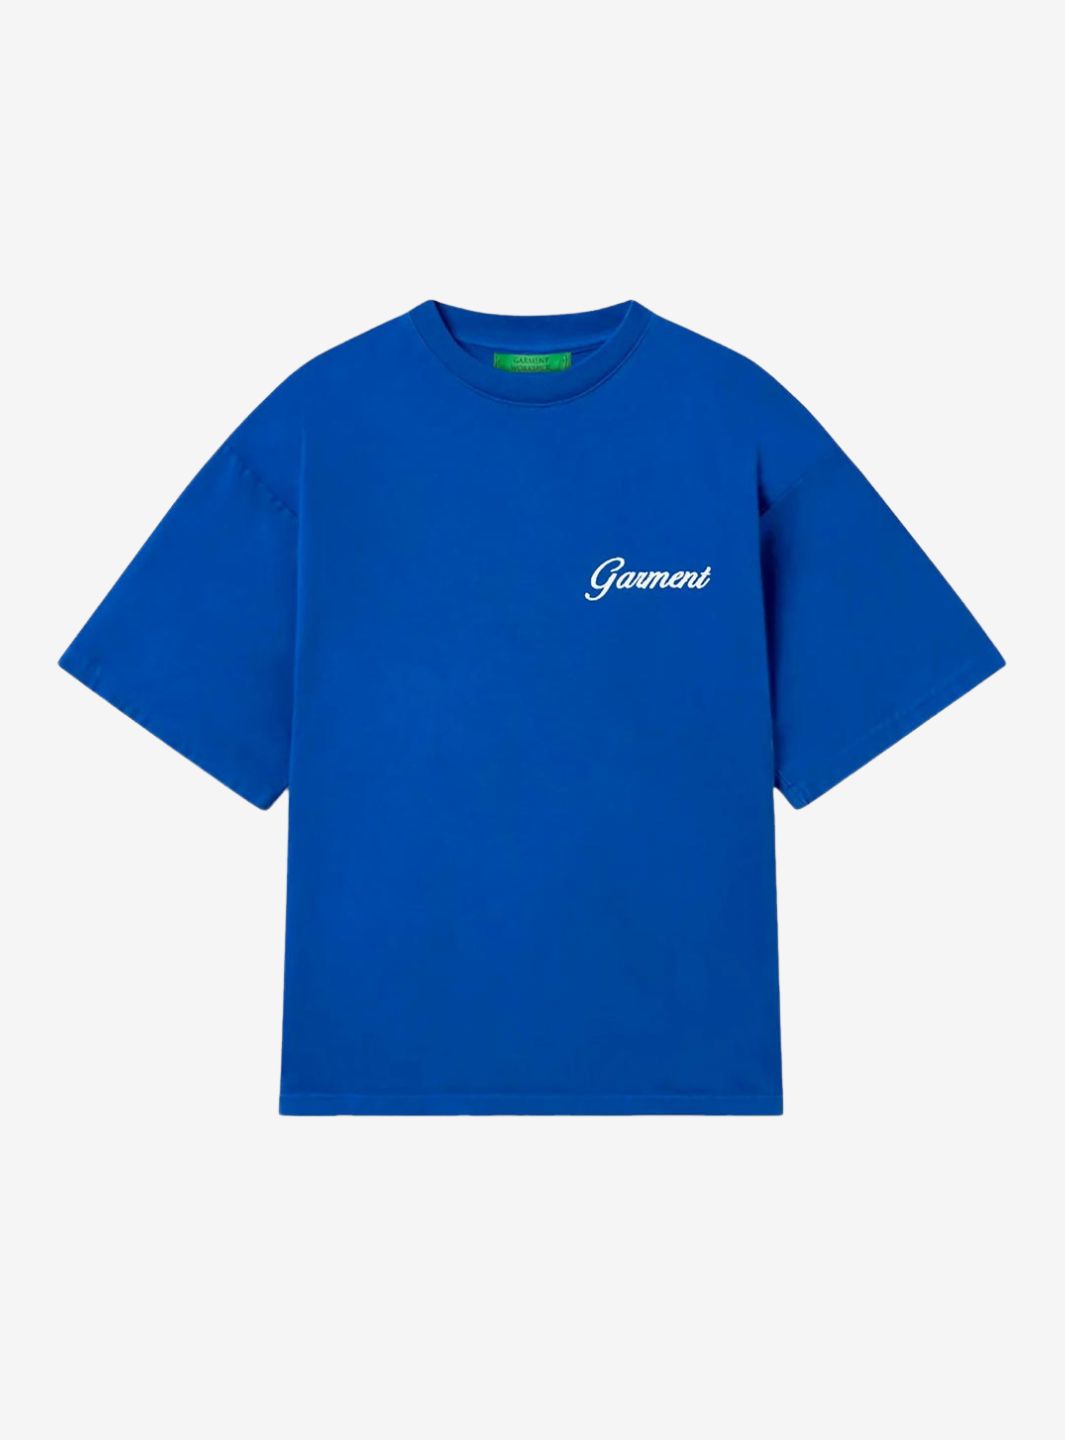 Garment Workshop T-Shirt If You Know You Know Blue | ResellZone